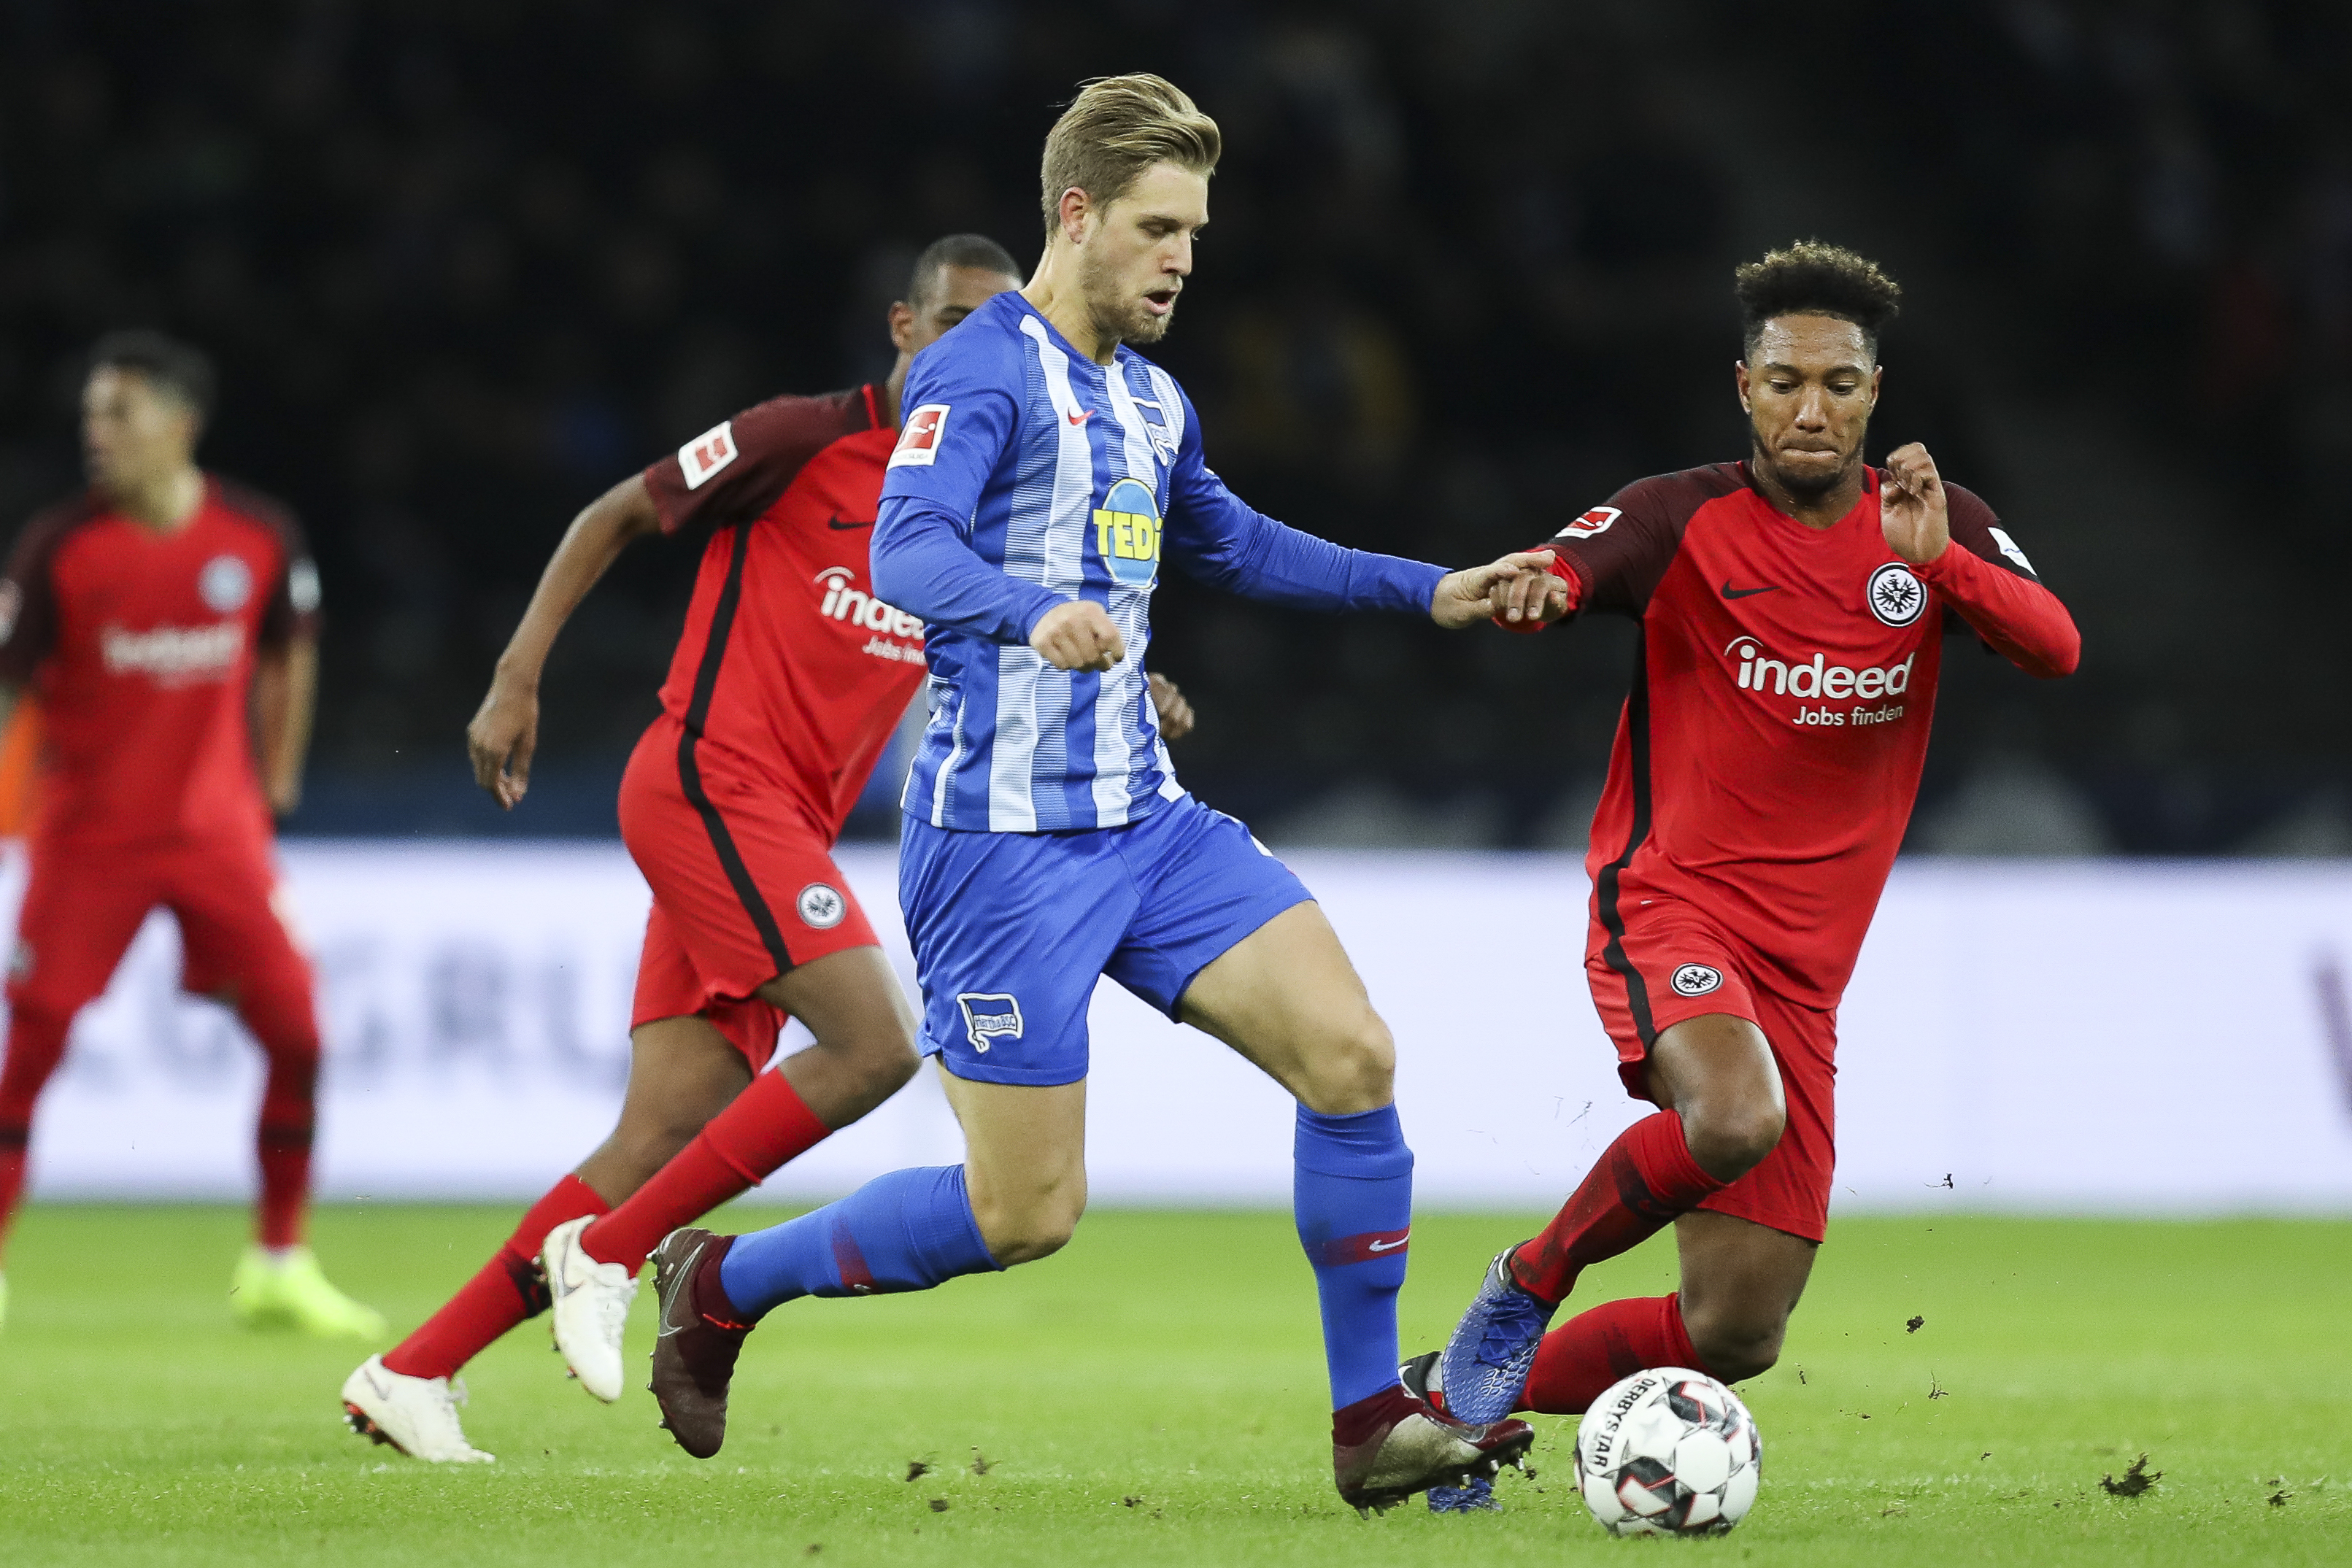 BERLIN, GERMANY - DECEMBER 08: Arne Maier #23 of Hertha Berlin battles for possession with Jonathan de Guzman #6 of Eintracht Frankfurt during the Bundesliga match between Hertha BSC and Eintracht Frankfurt at Olympiastadion on December 8, 2018 in Berlin, Germany. (Photo by Maja Hitij/Bongarts/Getty Images)